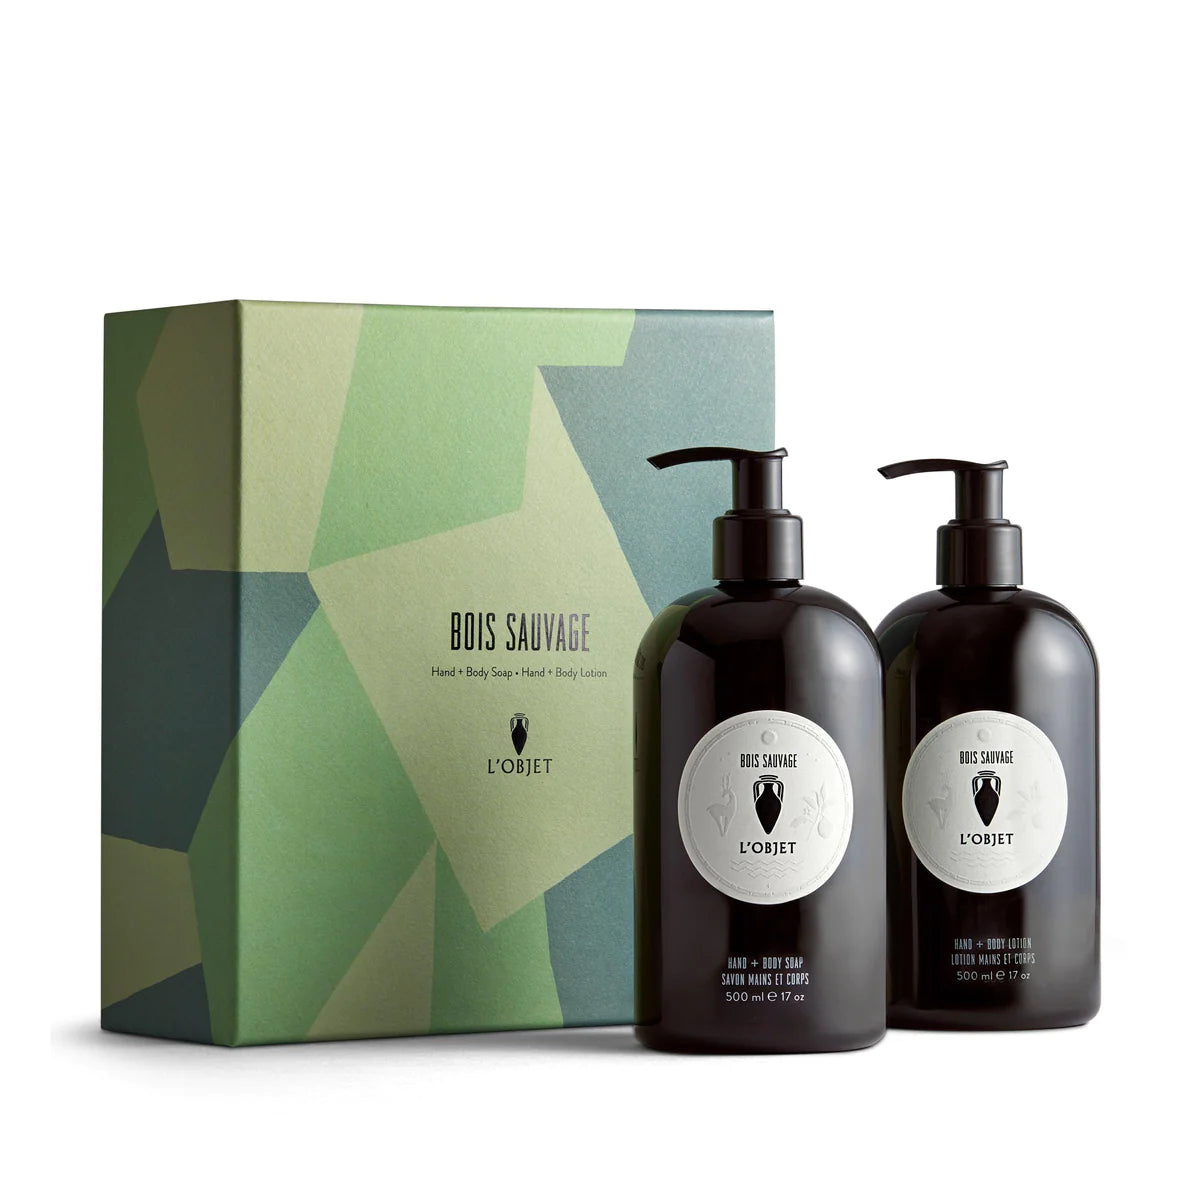 Bois Savage Hand & Body Soap and Lotion Gift Set